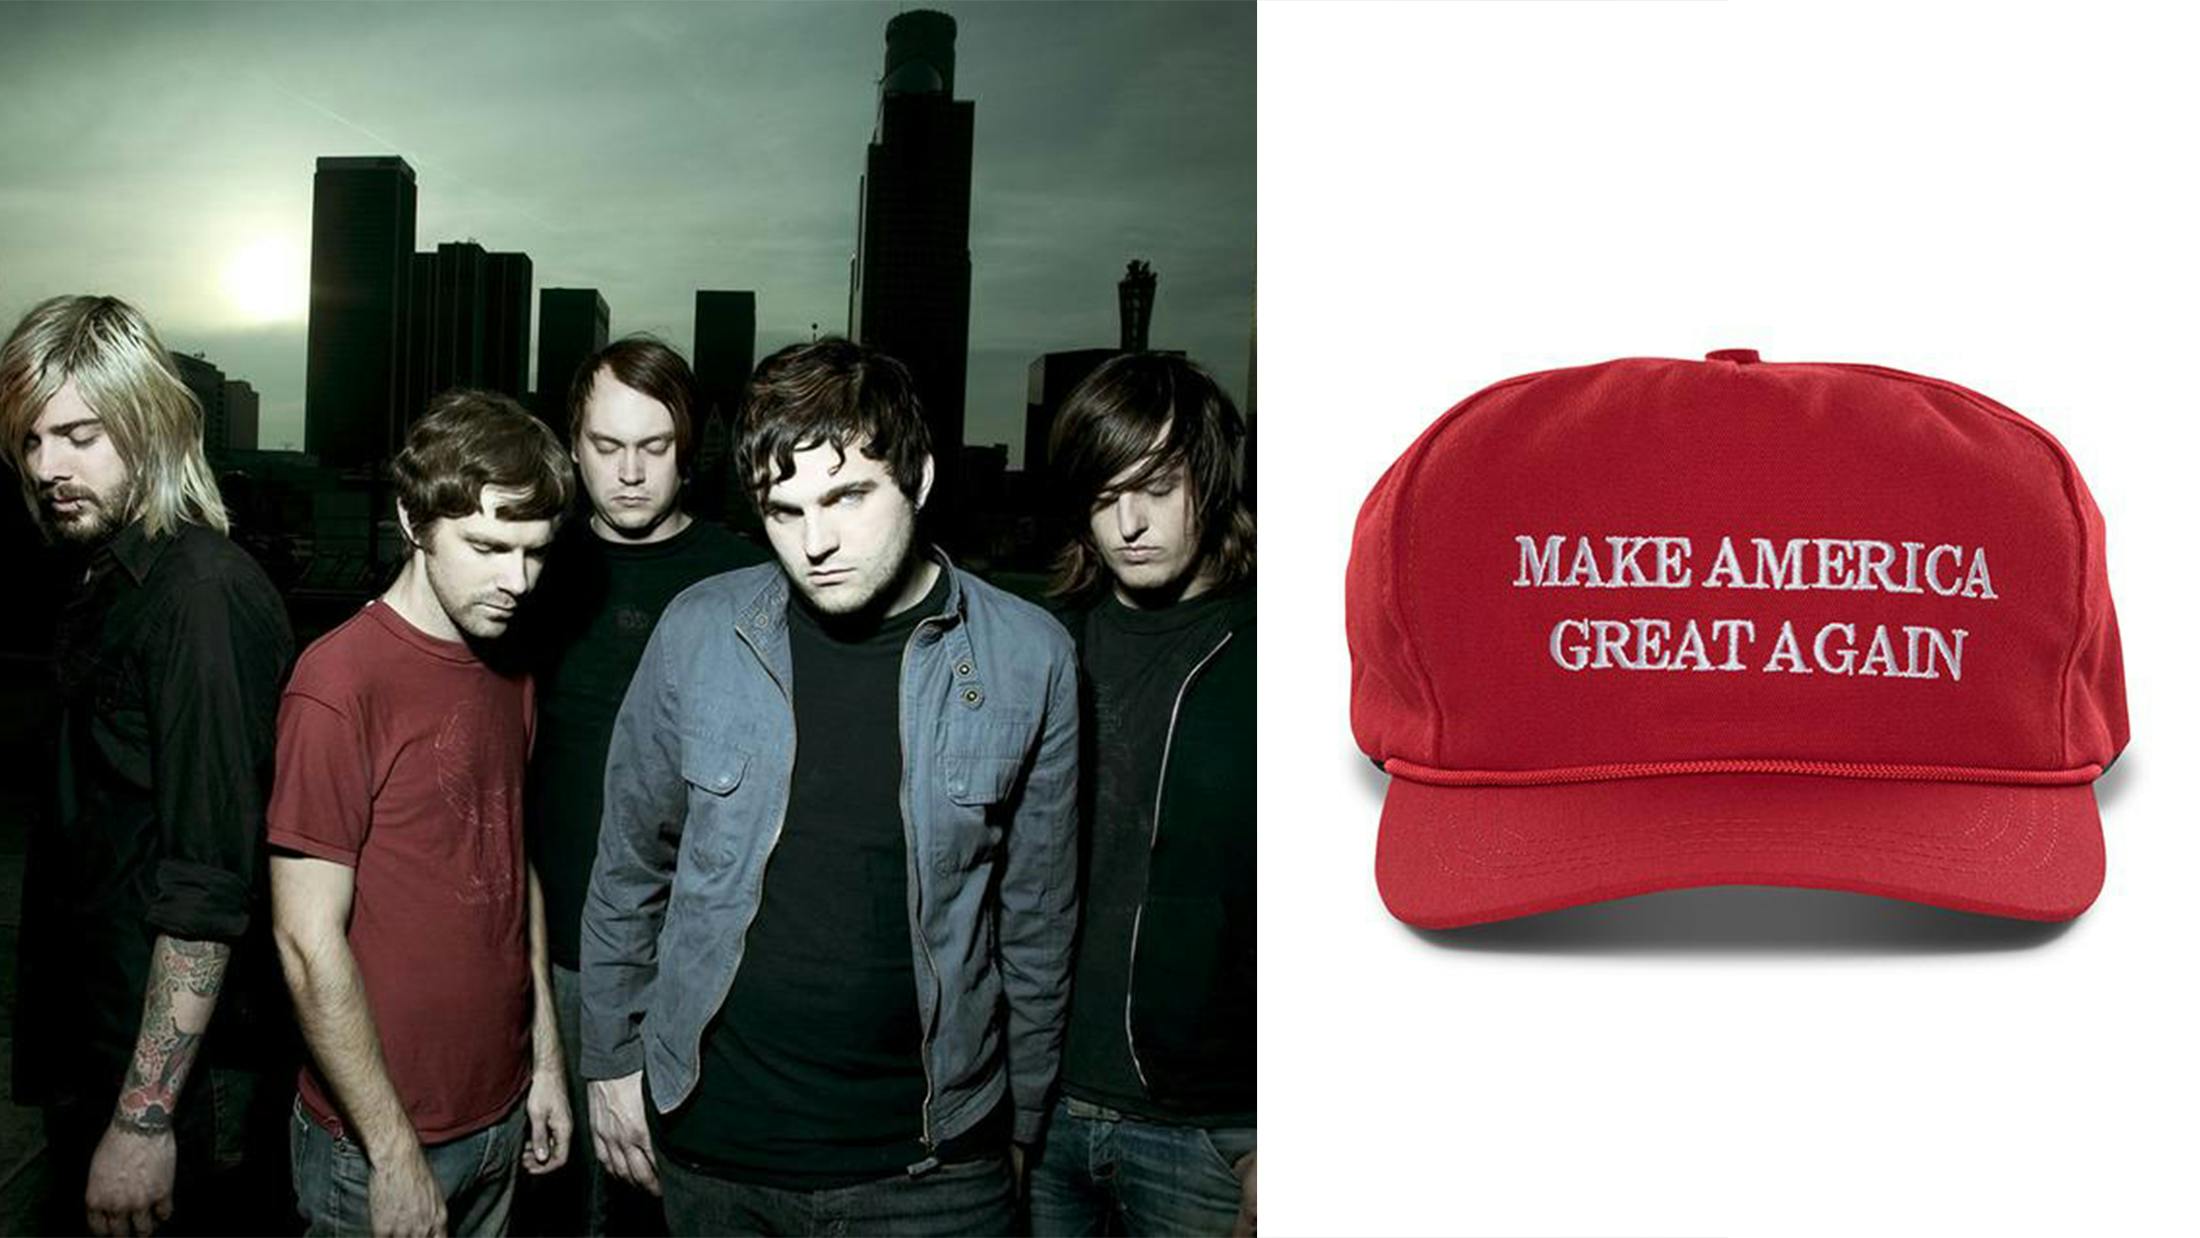 Norma Jean's Cory Brandan Says Make America Great Again Hats Are Welcome At His Shows